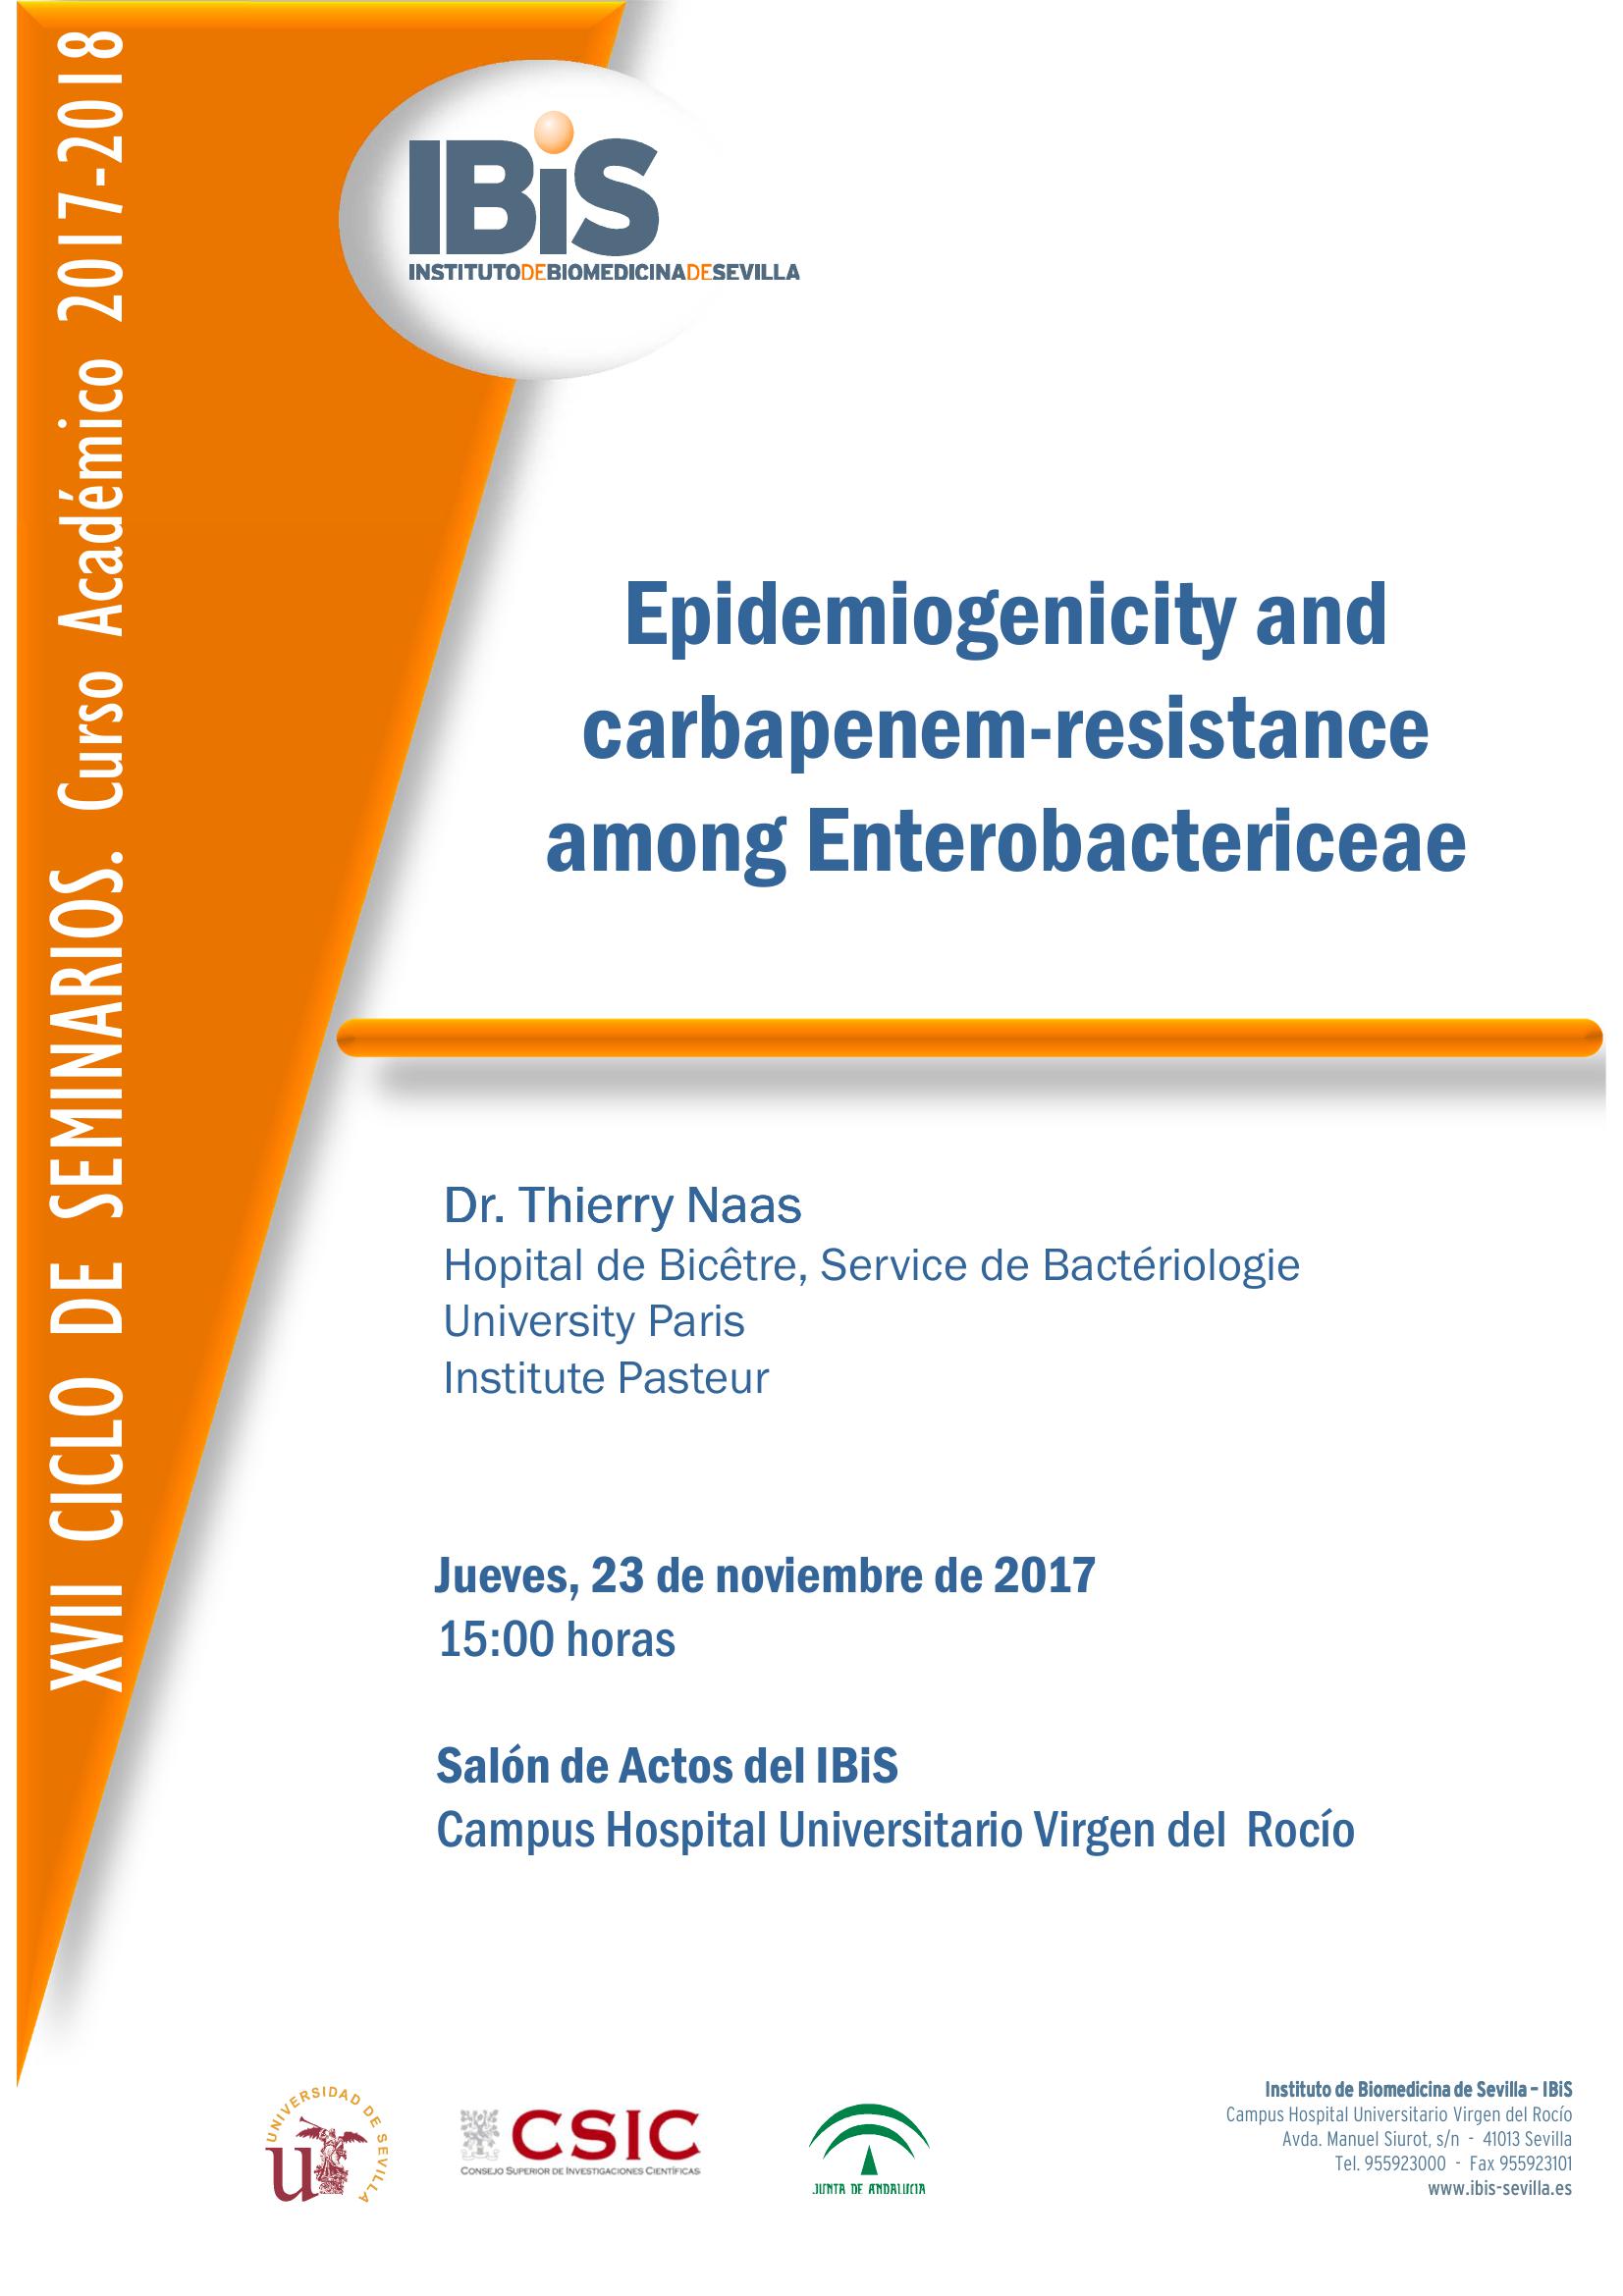 Poster: Epidemiogenicity and carbapenem-resistance among Enterobactericeae